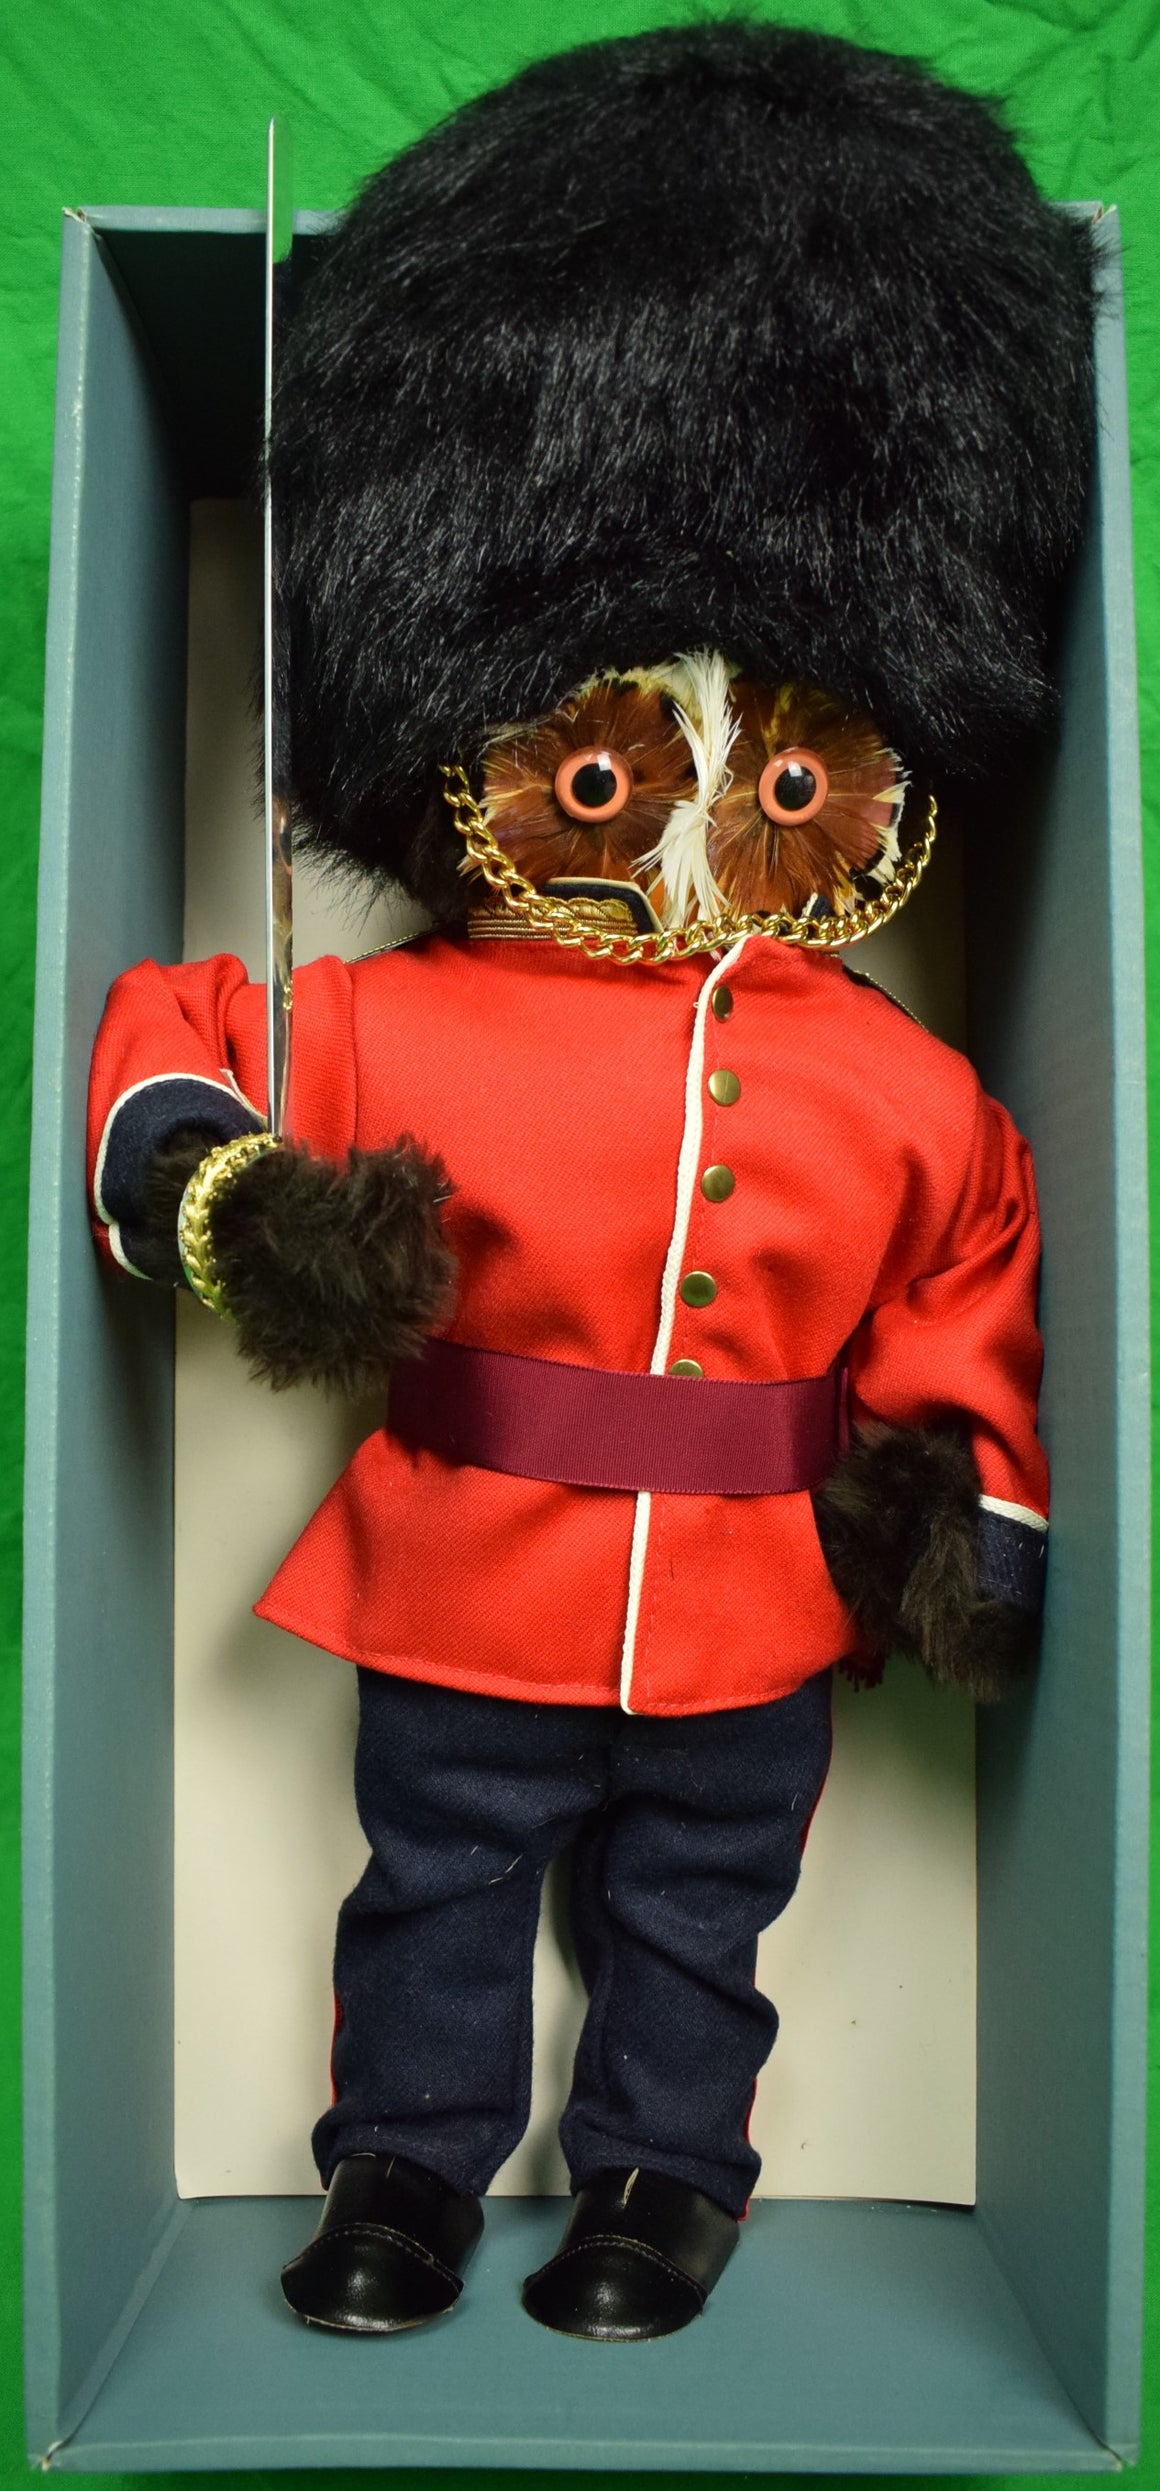 The London "Guard's Officer" Owl